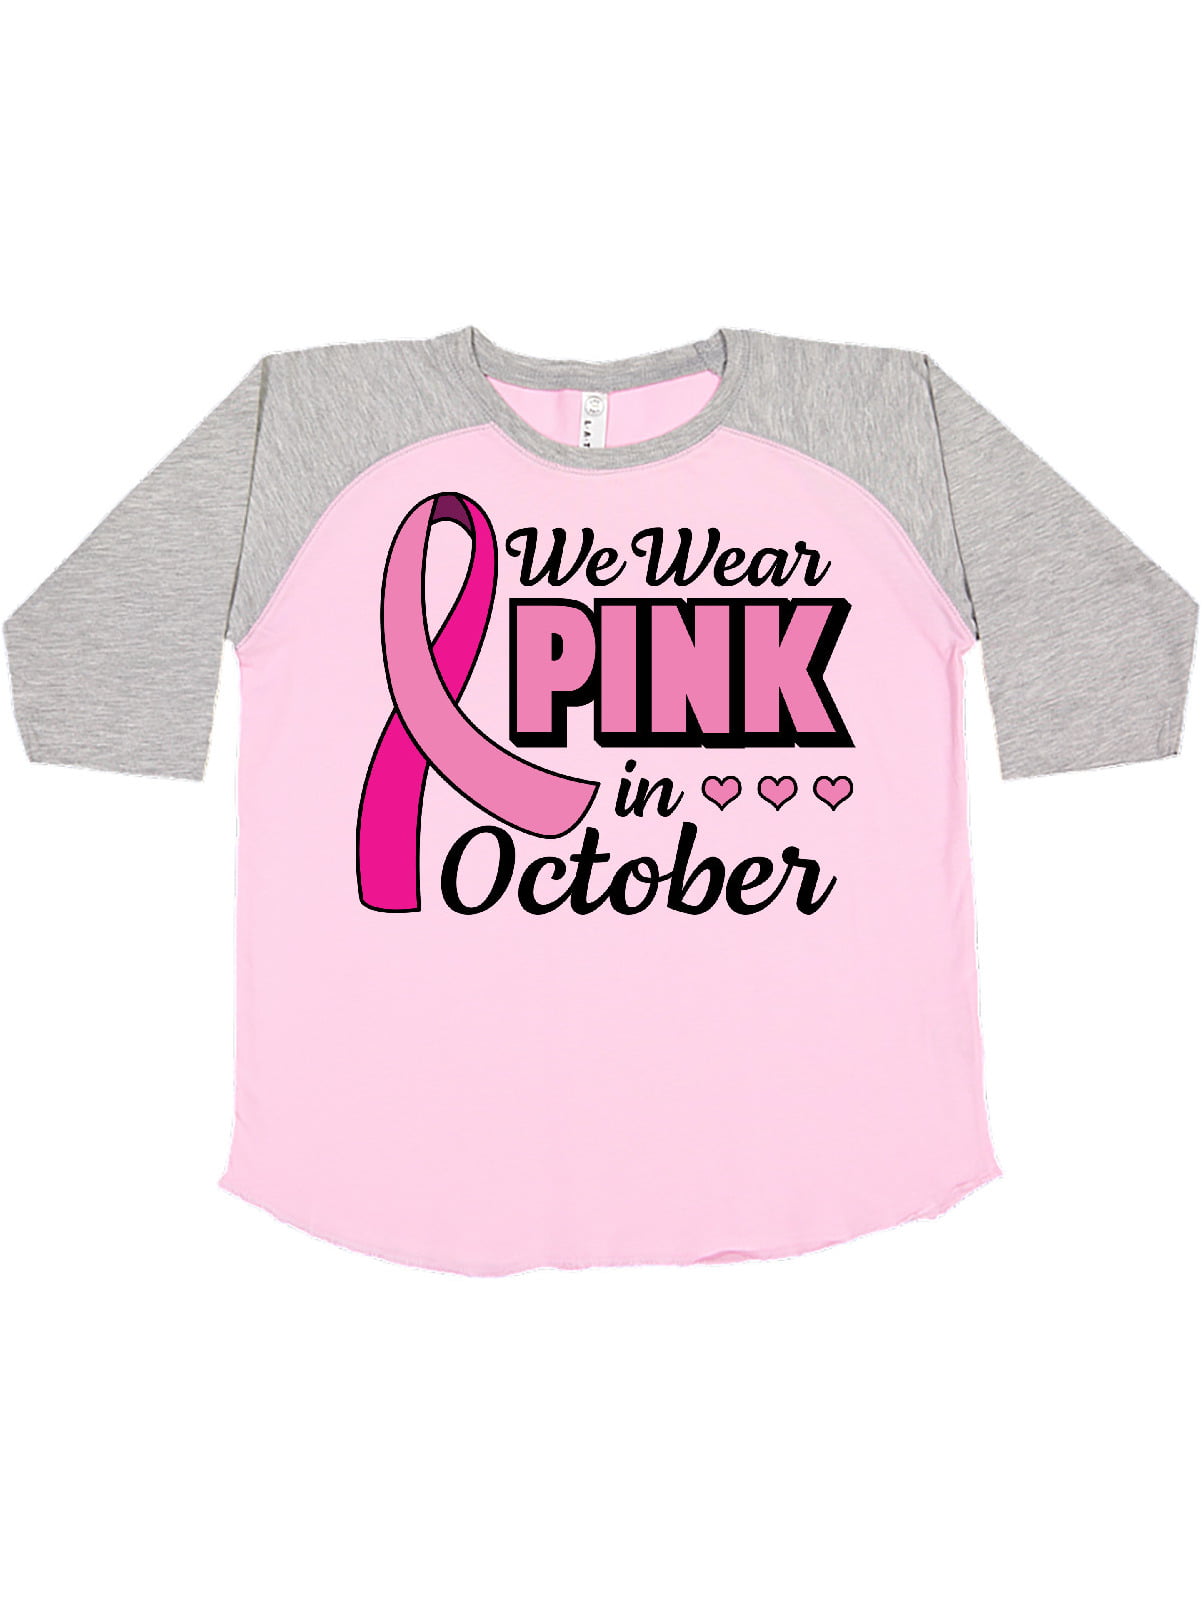 In October We Wear Pink Breast Cancer Awareness Month Short-Sleeve Unisex T-Shirt